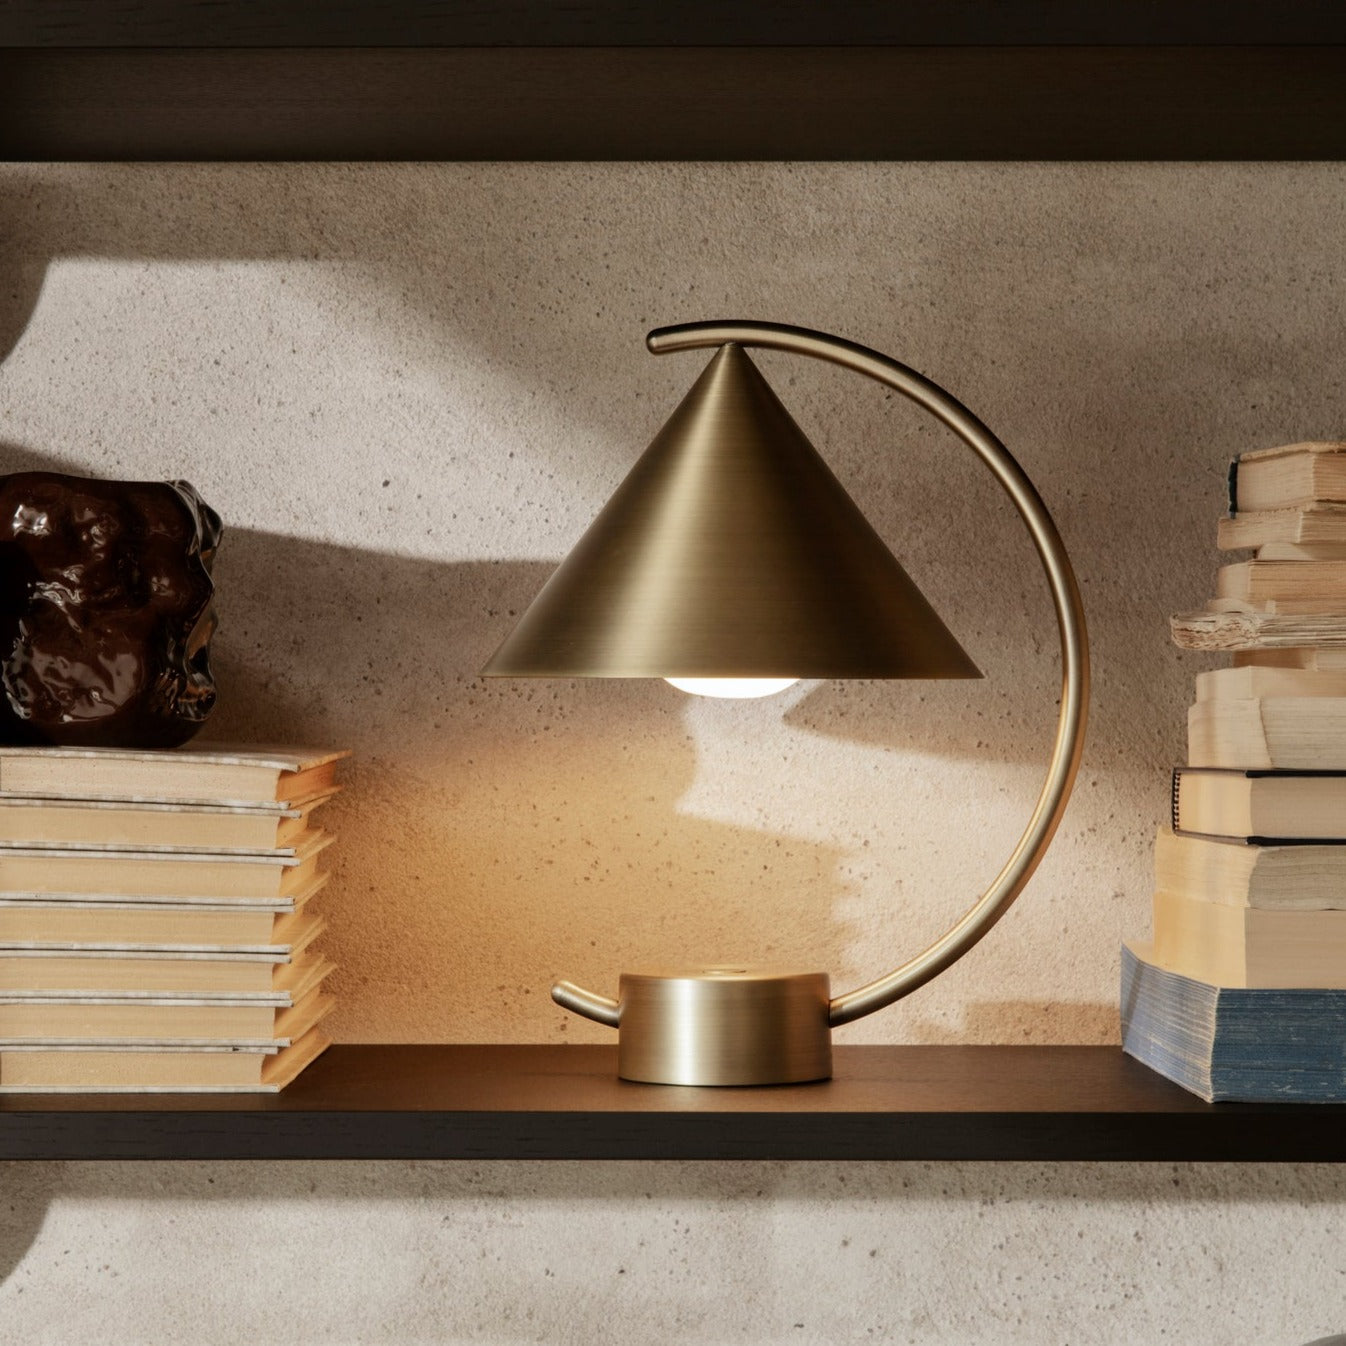 Ferm Living Meridian Lamp in brass. Buy online at someday designs. #colour_brass